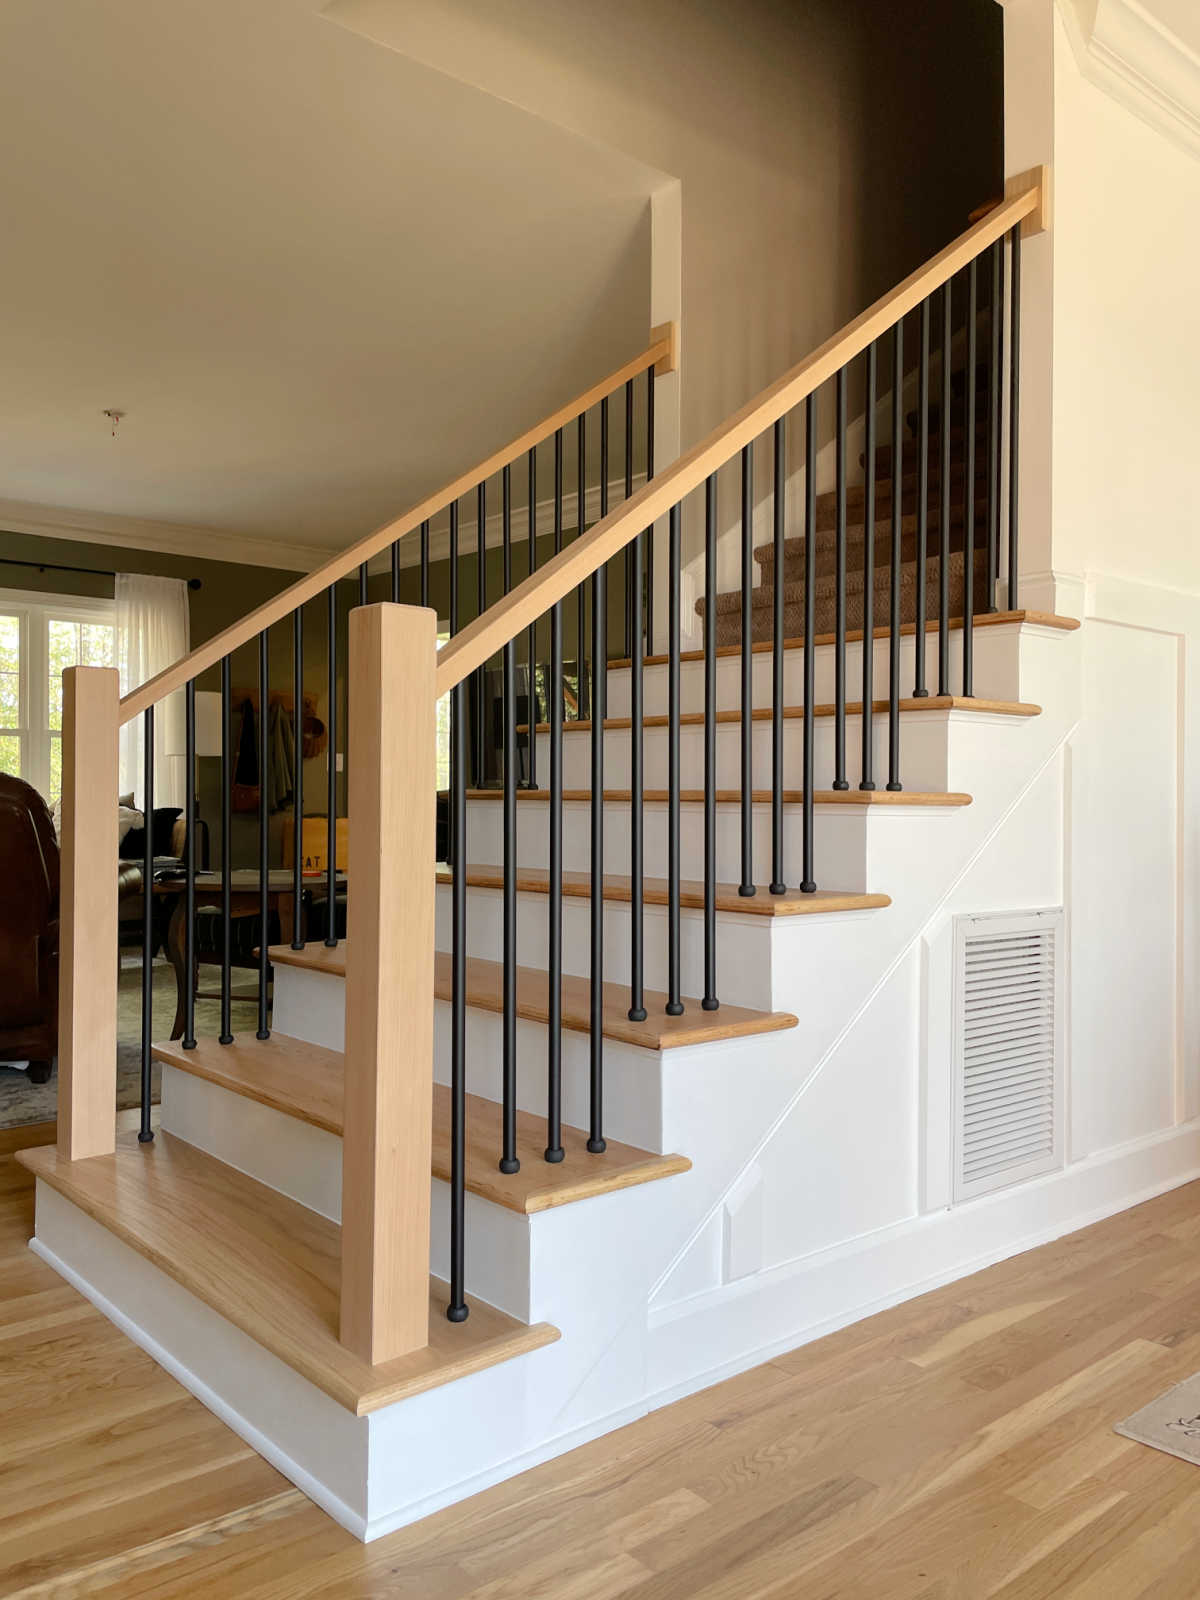 How Much Do Stairs Cost To Build